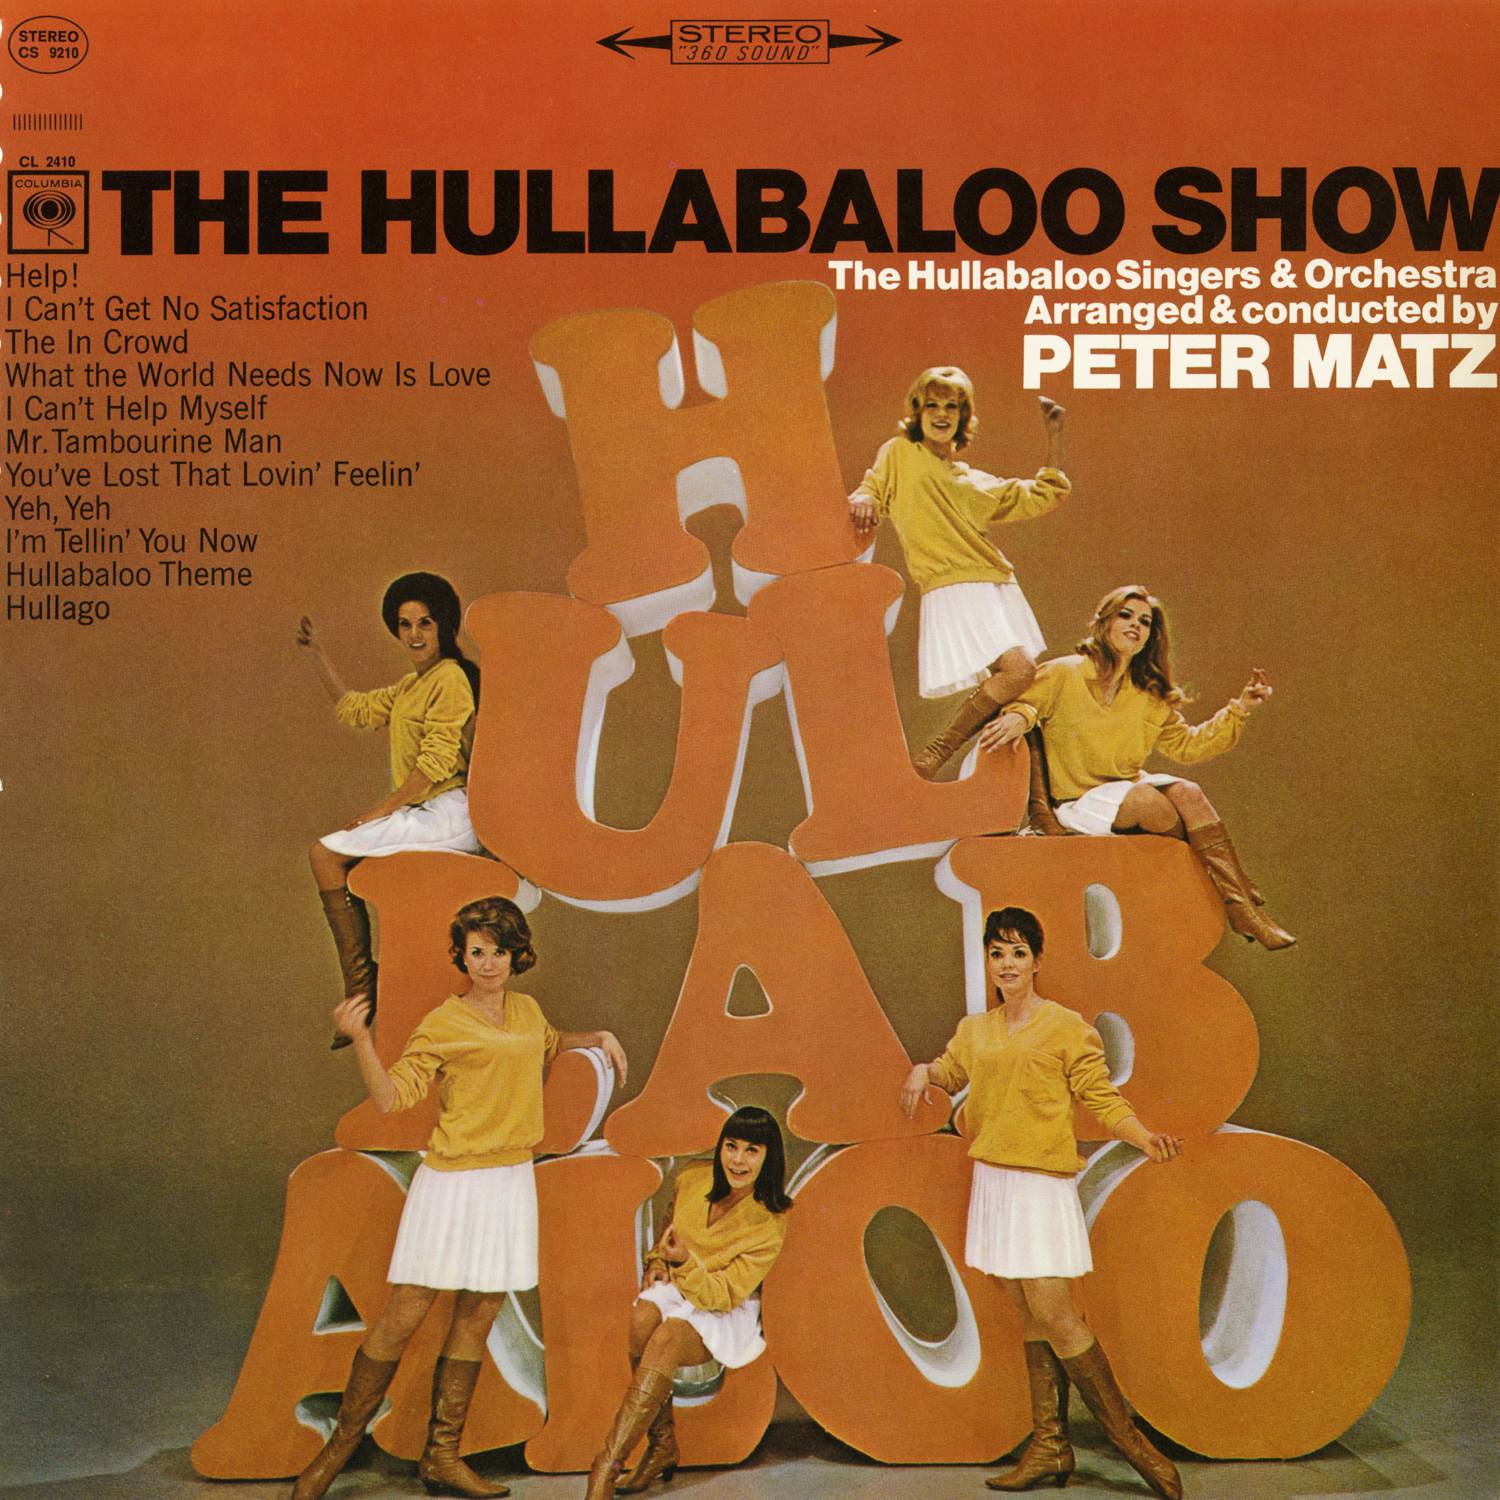 The Hullabaloo Singers And Orchestra – The Hullabaloo Show (1965/2015) [AcousticSounds FLAC 24bit/96kHz]